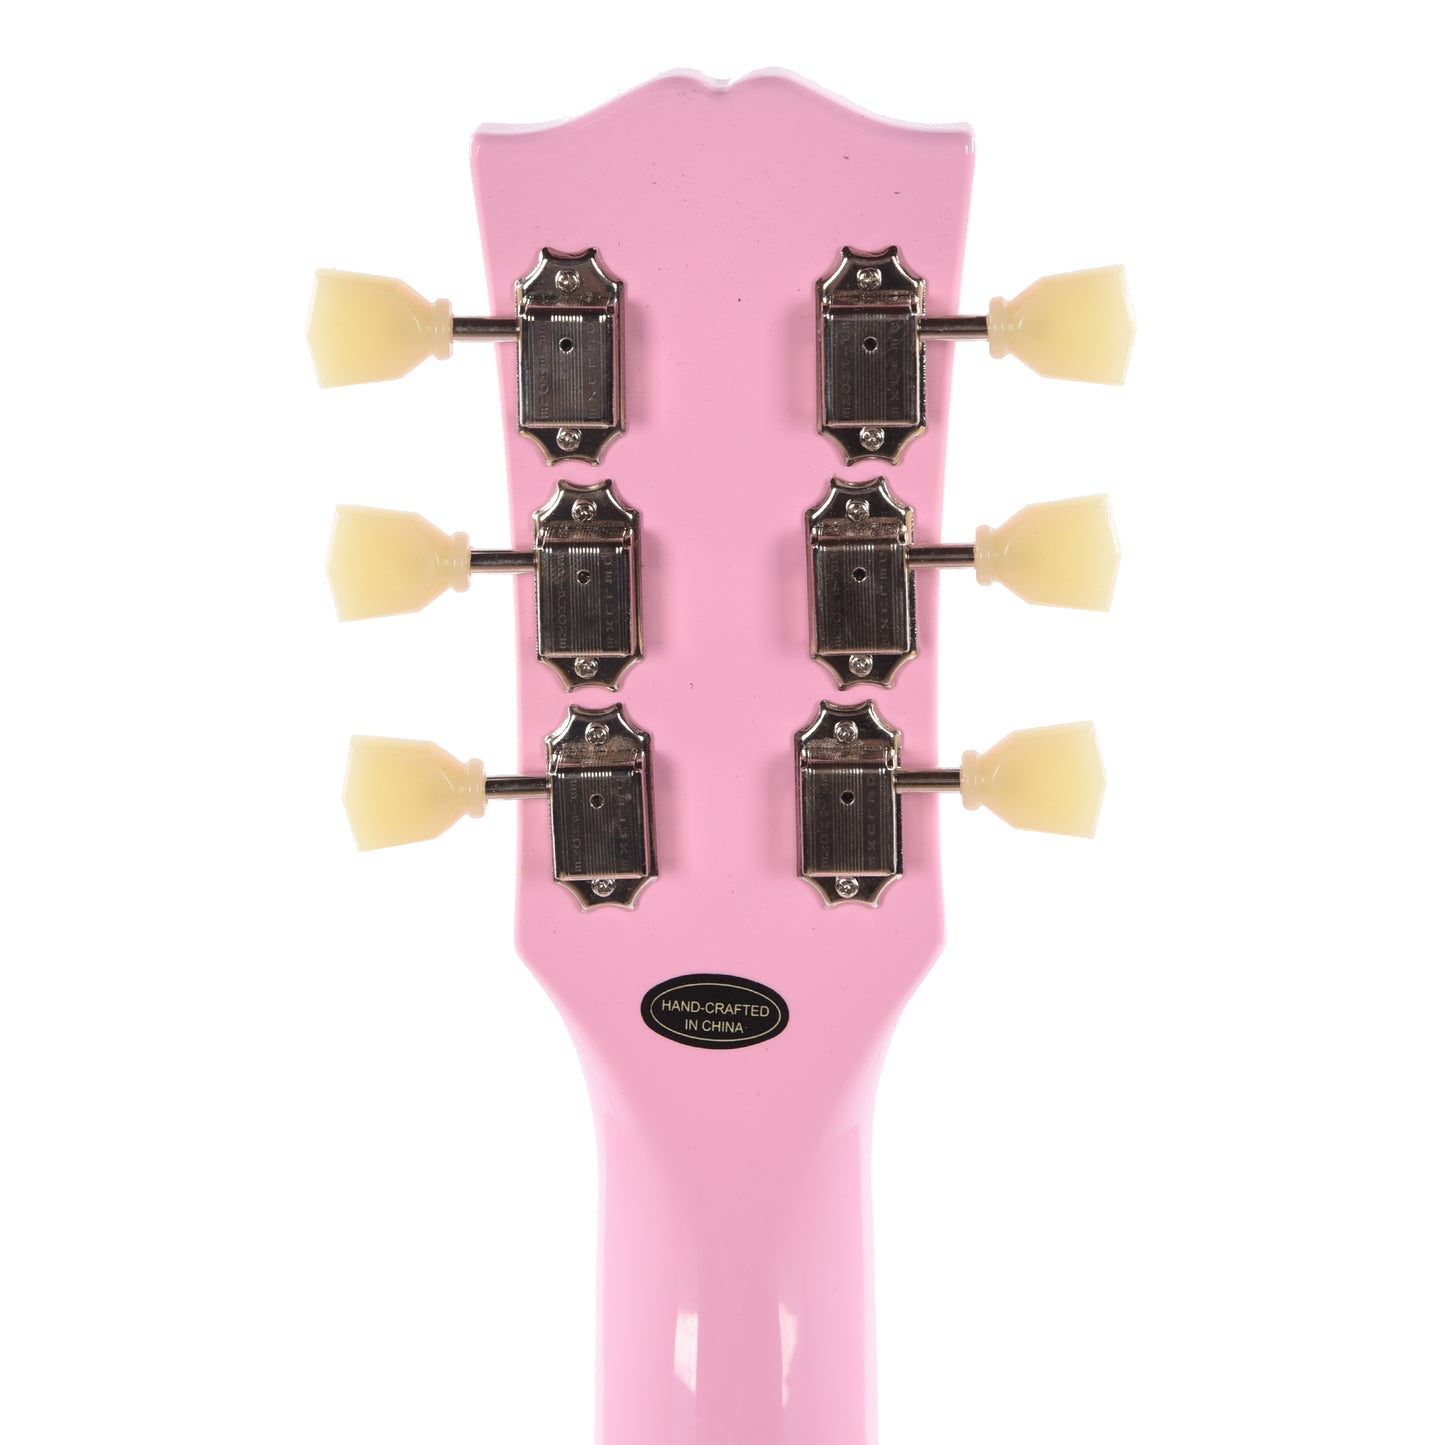 Epiphone Inspired by Gibson Custom J-180 LS Pink